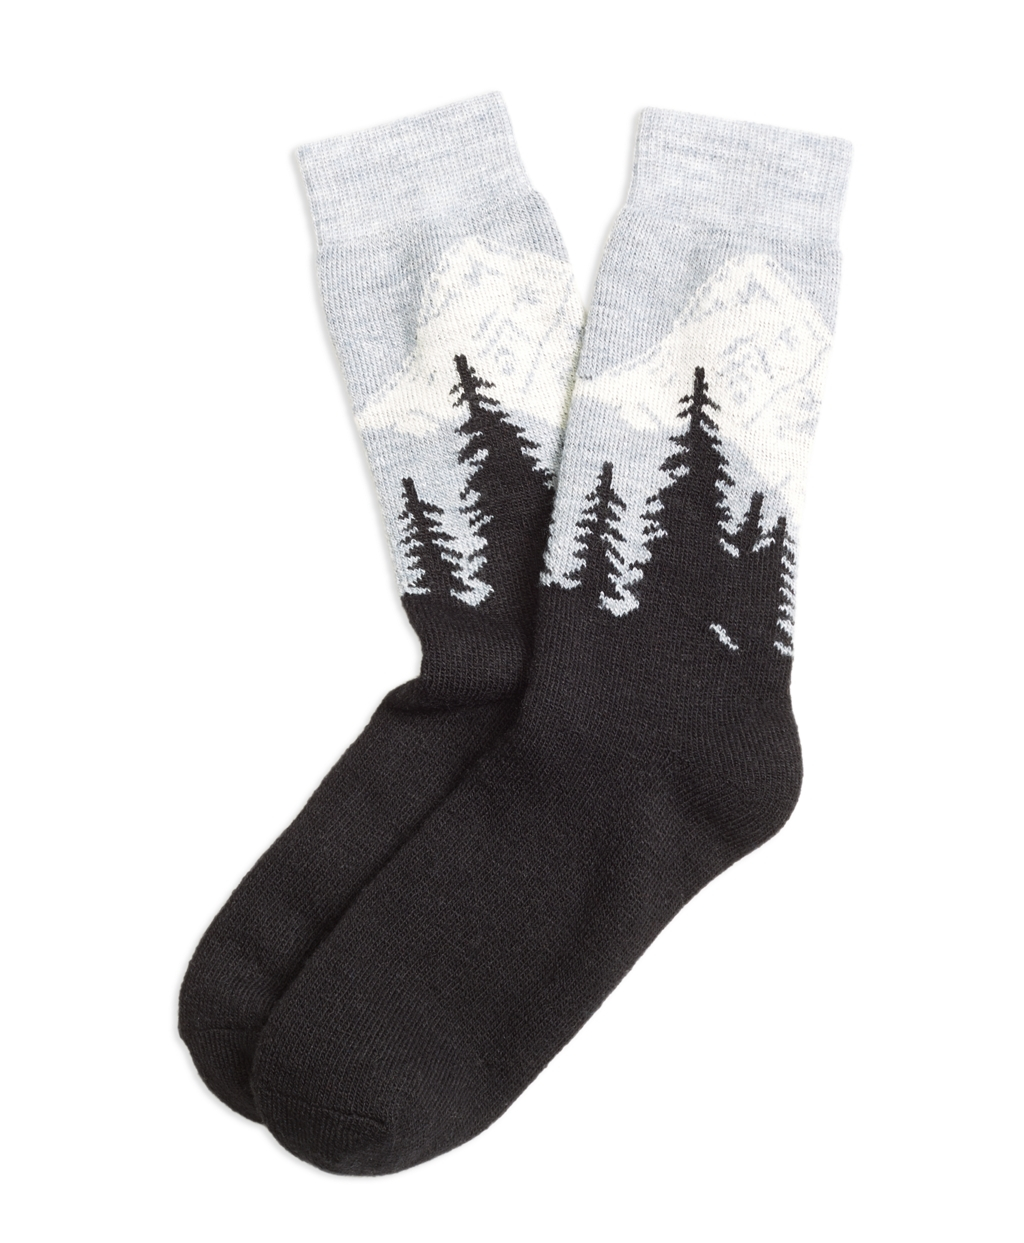 Lyst - Brooks Brothers Mountain Motif Crew Socks in Gray for Men